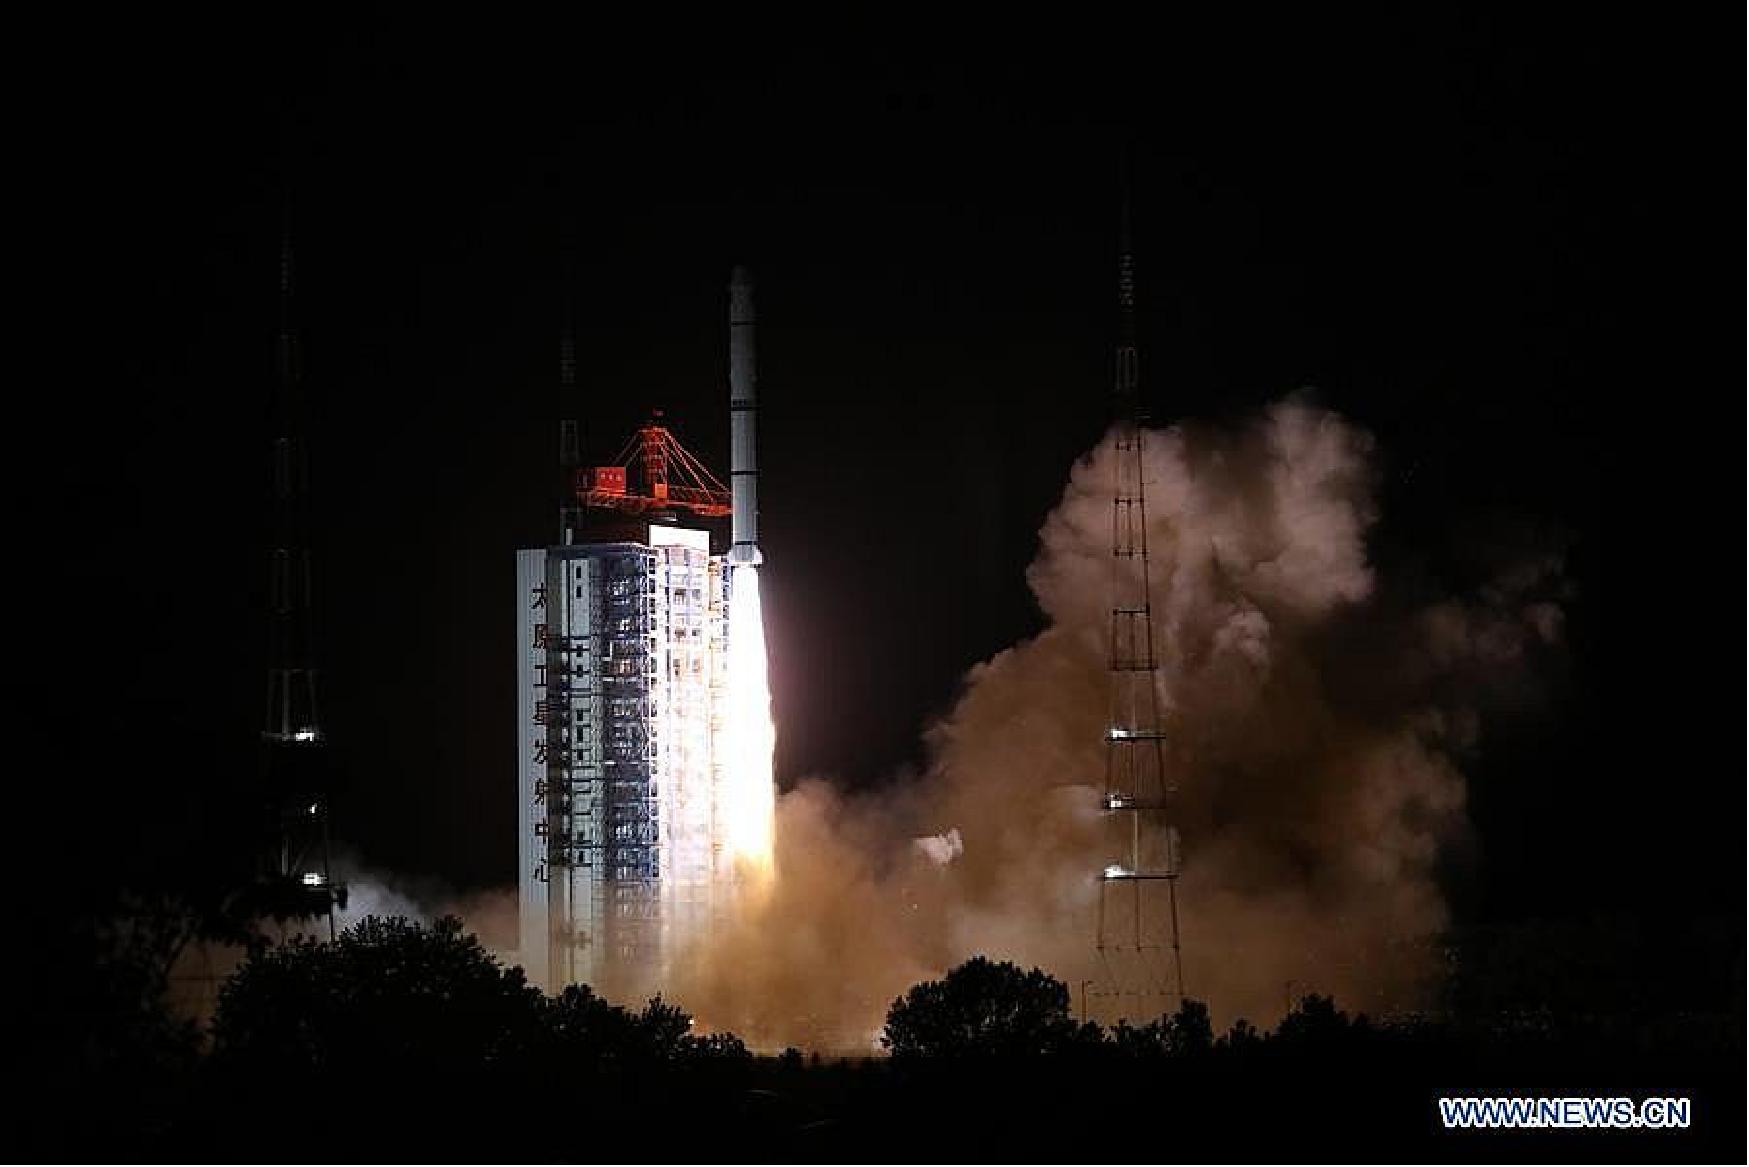 Figure 3: A Long March-2C rocket, carrying the satellite HY-1D, is launched from the Taiyuan Satellite Launch Center, north China's Shanxi Province, June 11, 2020. The new satellite will form China's first satellite constellation for marine civil service together with HY-1C, which was launched in September 2018. (Photo by Zheng Taotao/Xinhua)